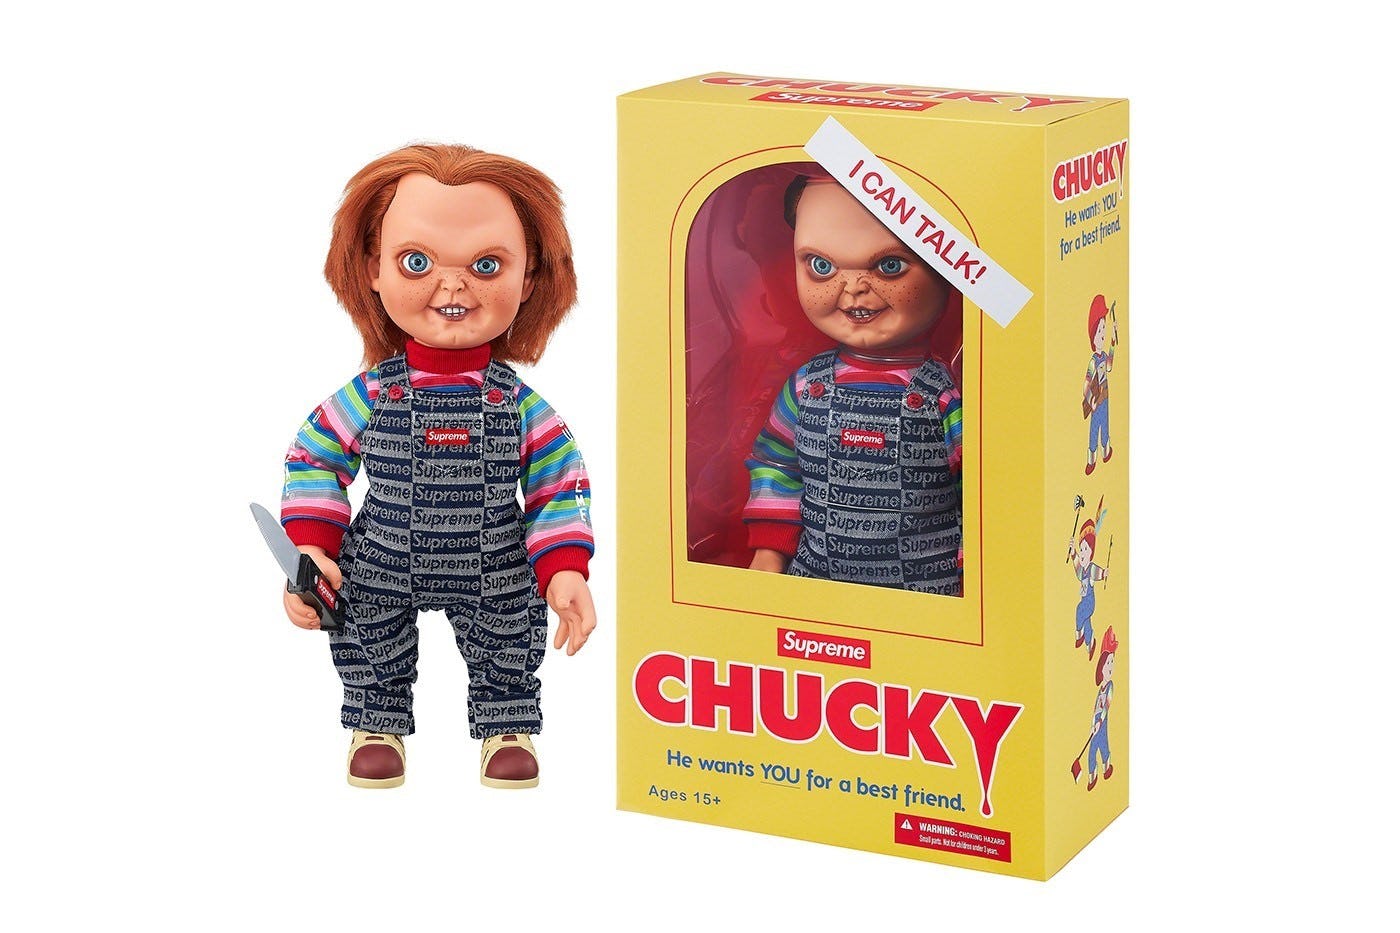 Supreme gave the Chucky doll a hypebeast makeover